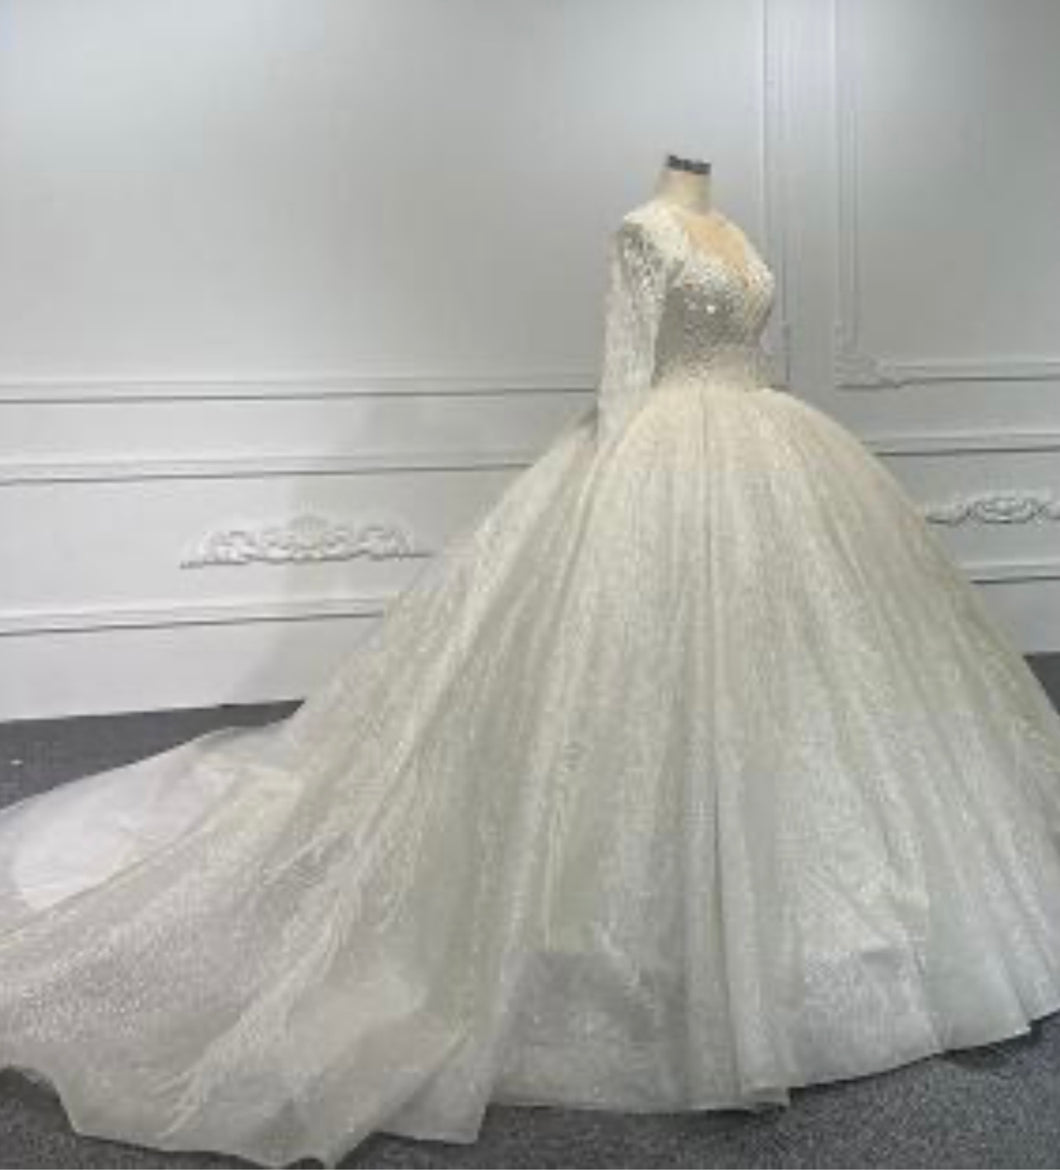  'Ball gown dress' wedding dress size-08 PREOWNED